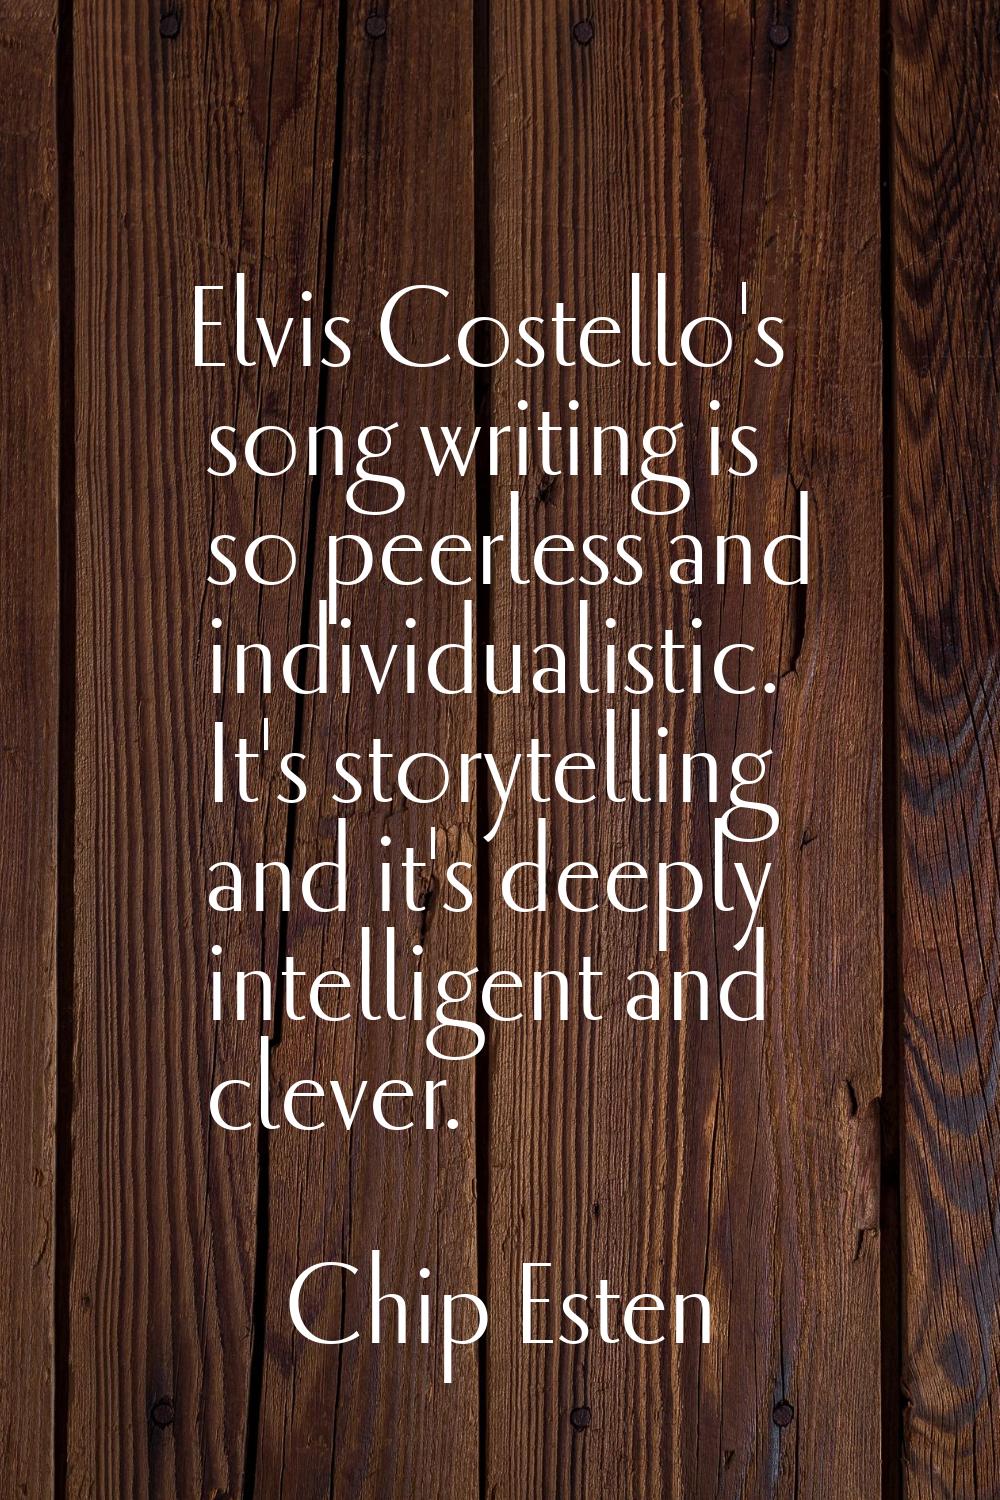 Elvis Costello's song writing is so peerless and individualistic. It's storytelling and it's deeply